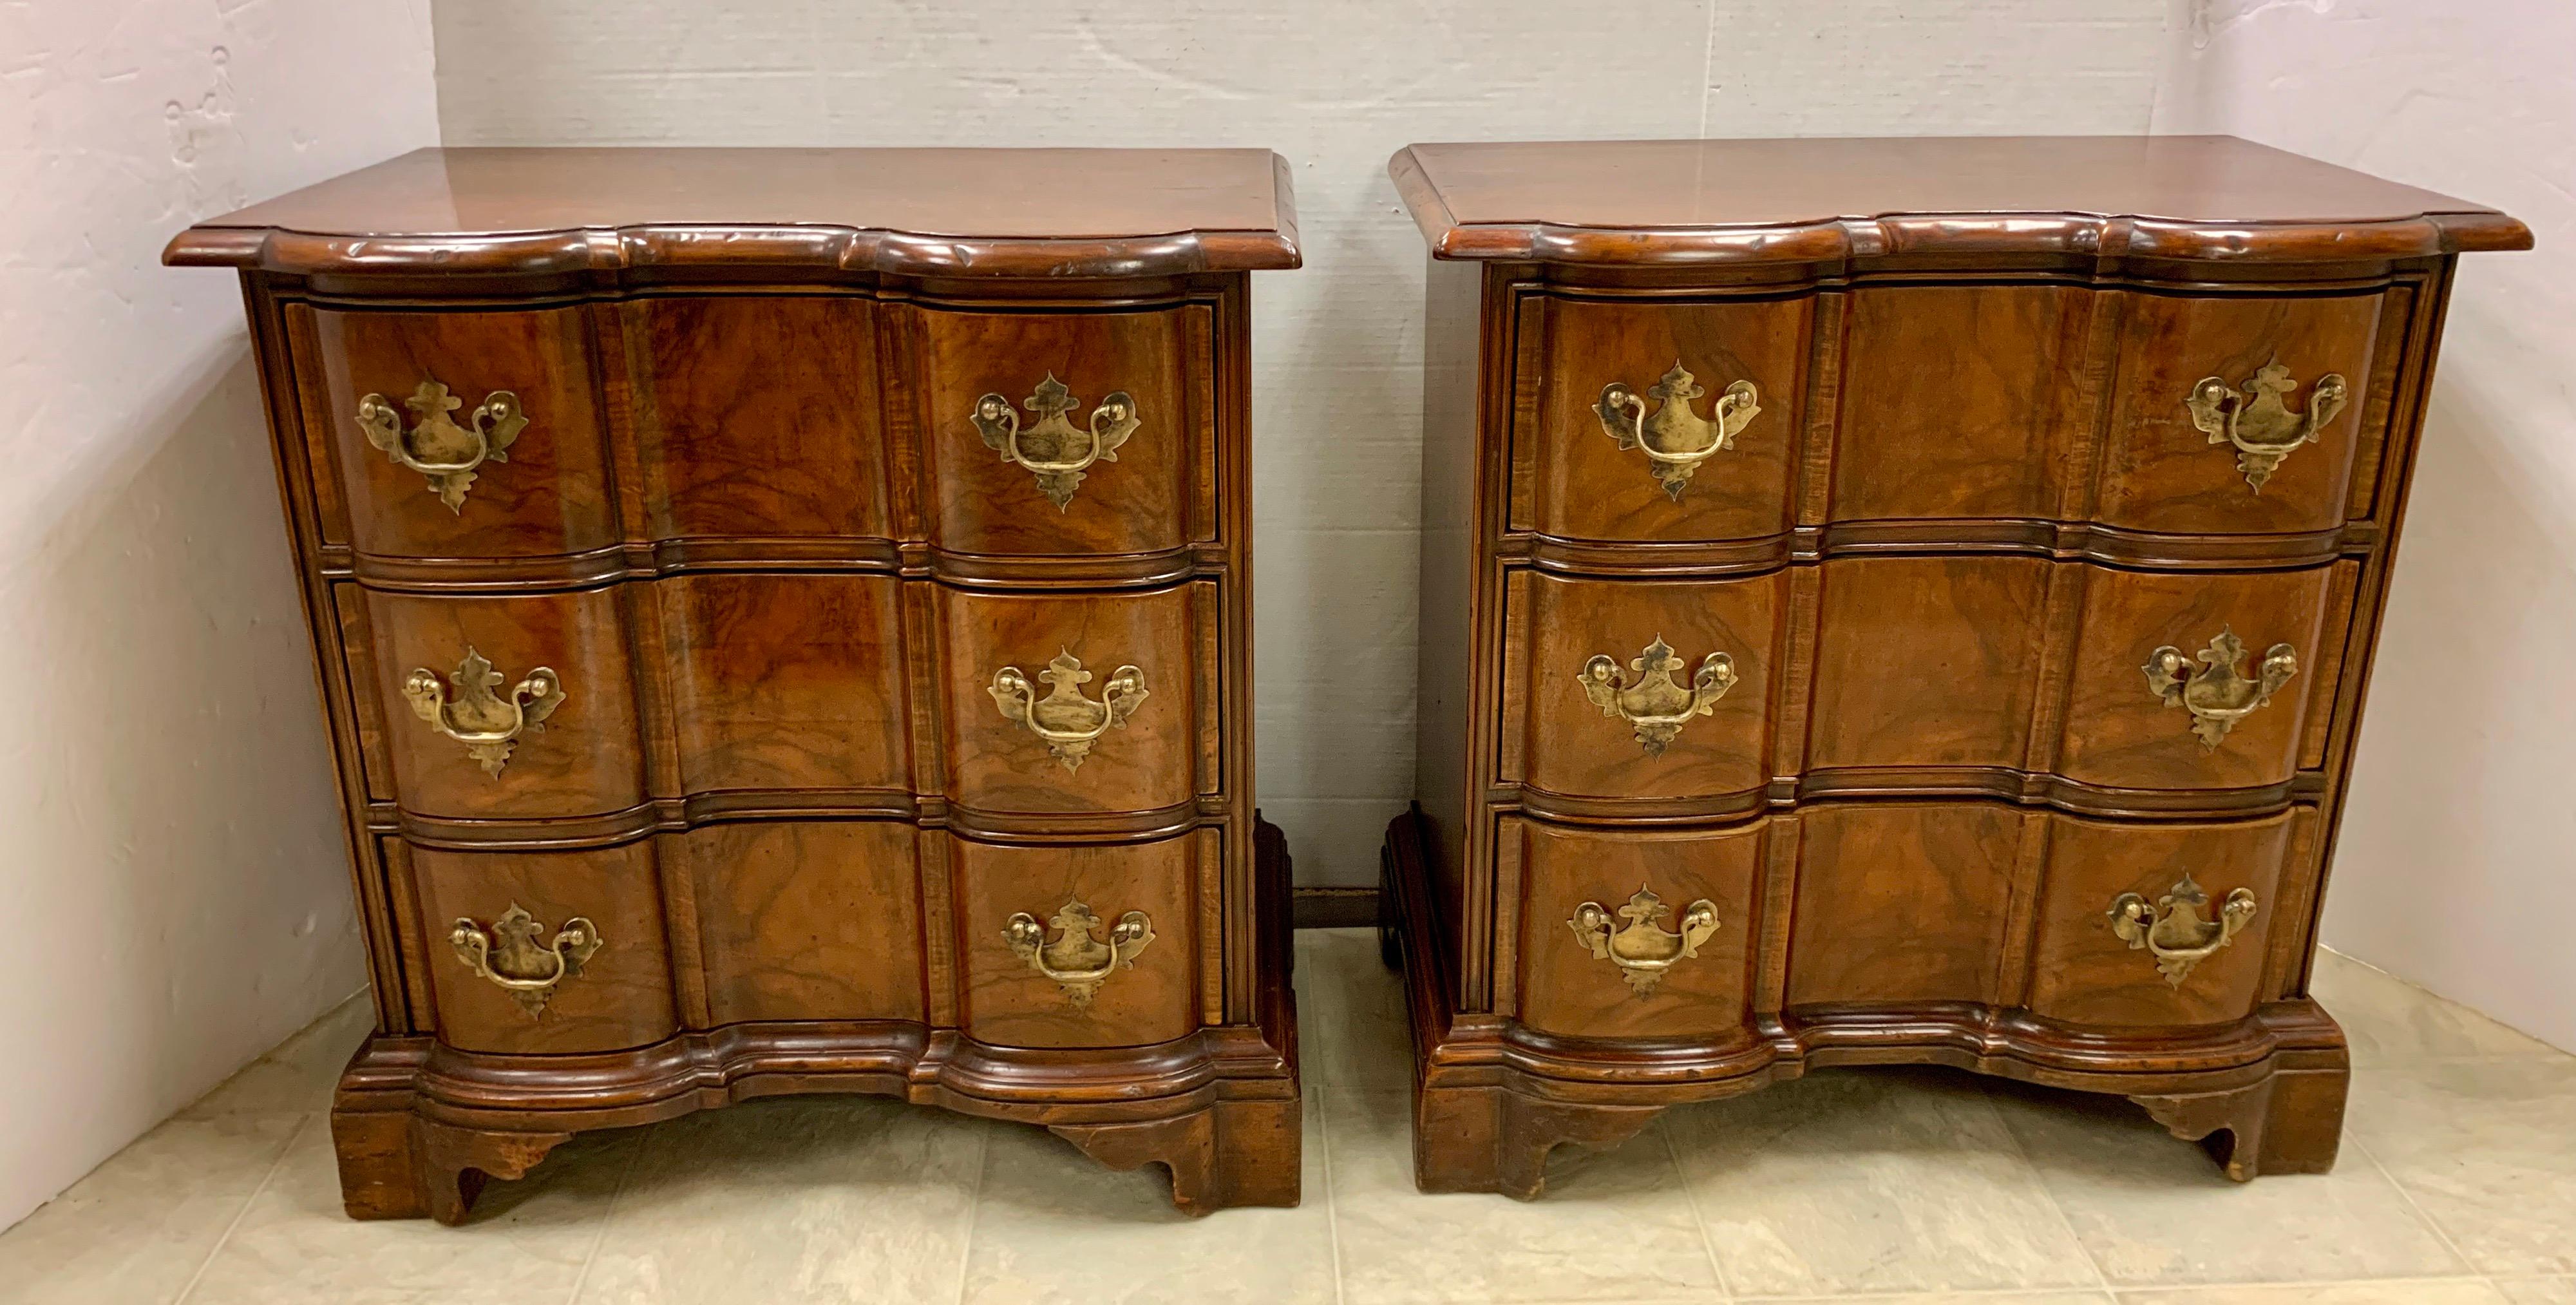 Pair of small mahogany three-drawer block front chests with dovetailed drawers, bracket feet and brass hardware. They have a beautiful aged patina. They’re small size make them perfect as nightstands.